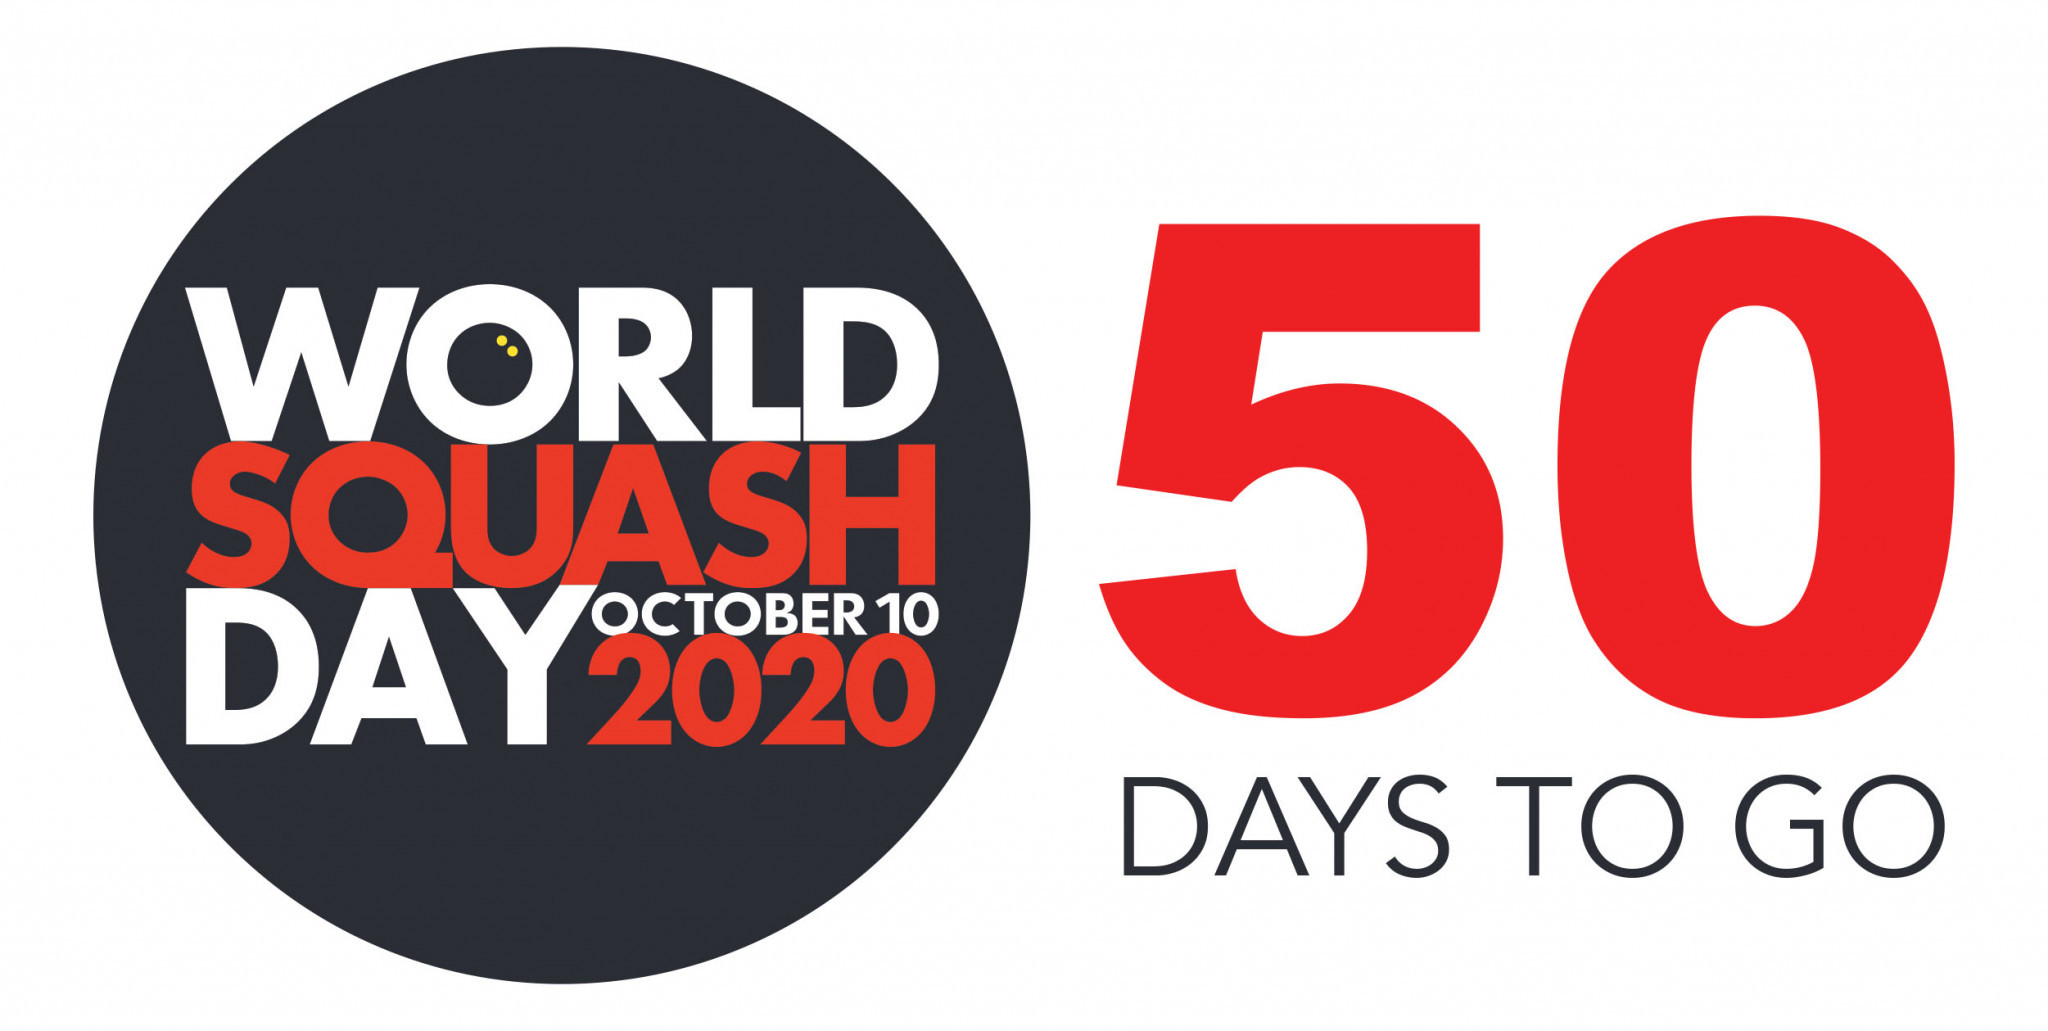 World Squash Day set to promote sport on social media in way never done before